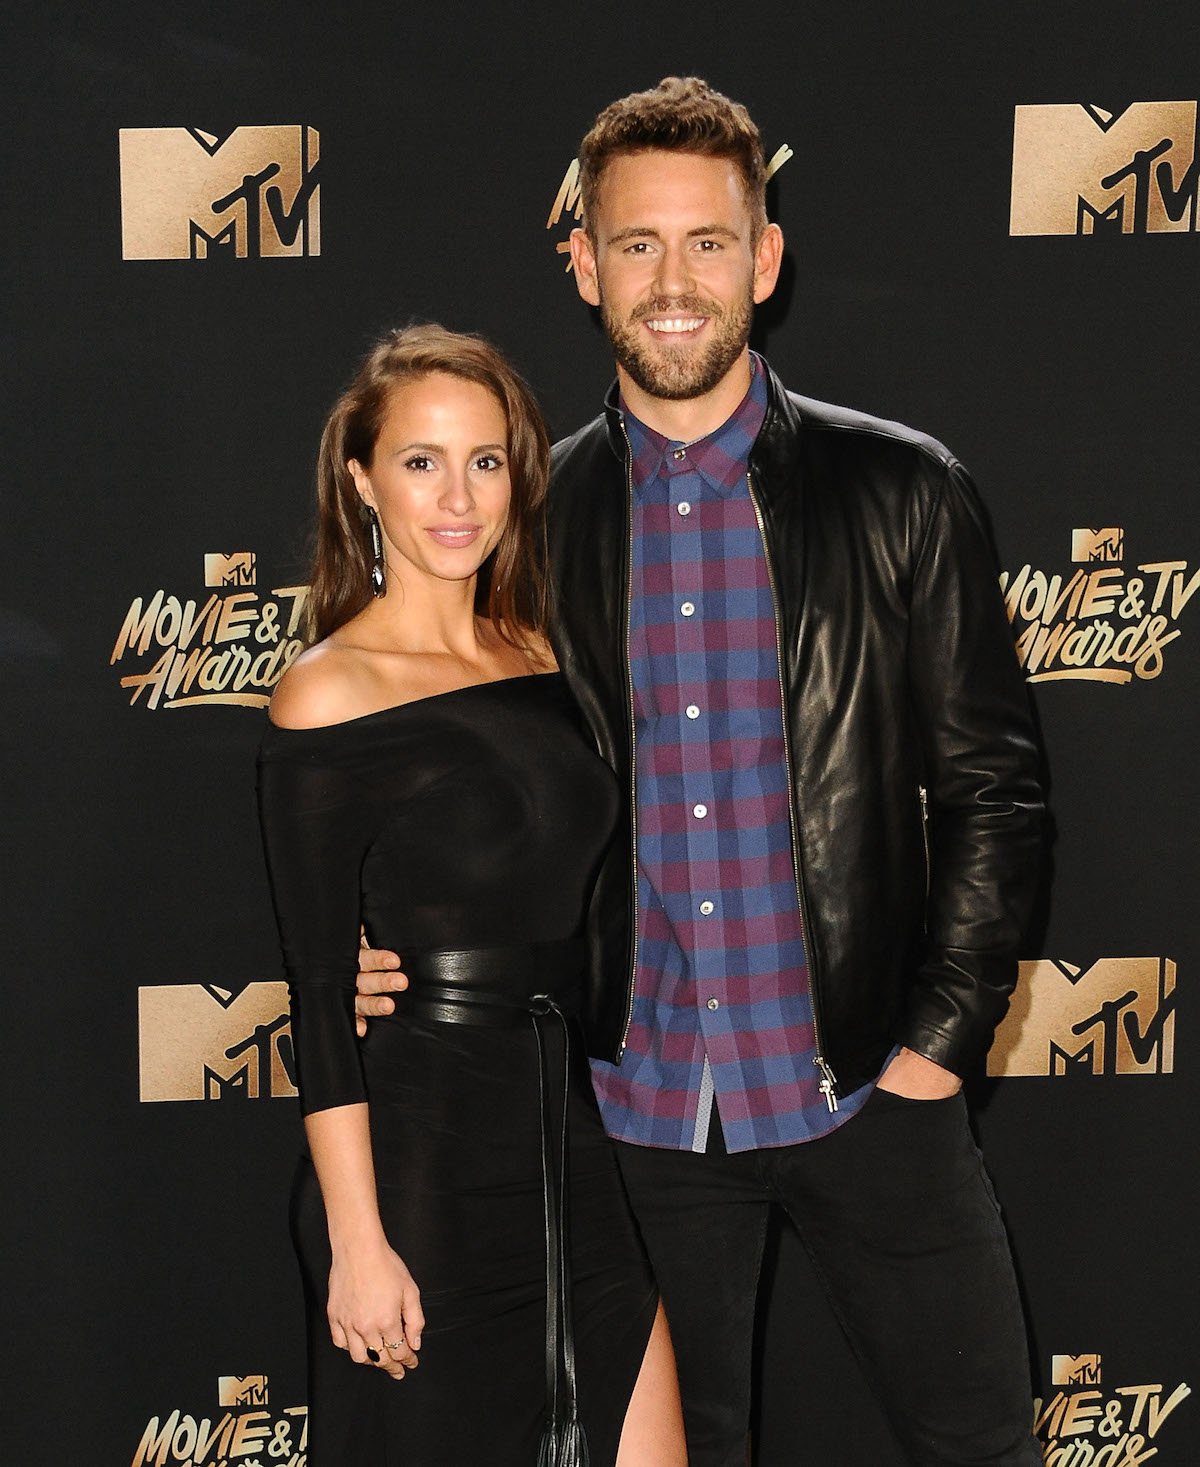 Vanessa Grimaldi and Nick Viall in matching formal black outfits pose for the camera at an event.